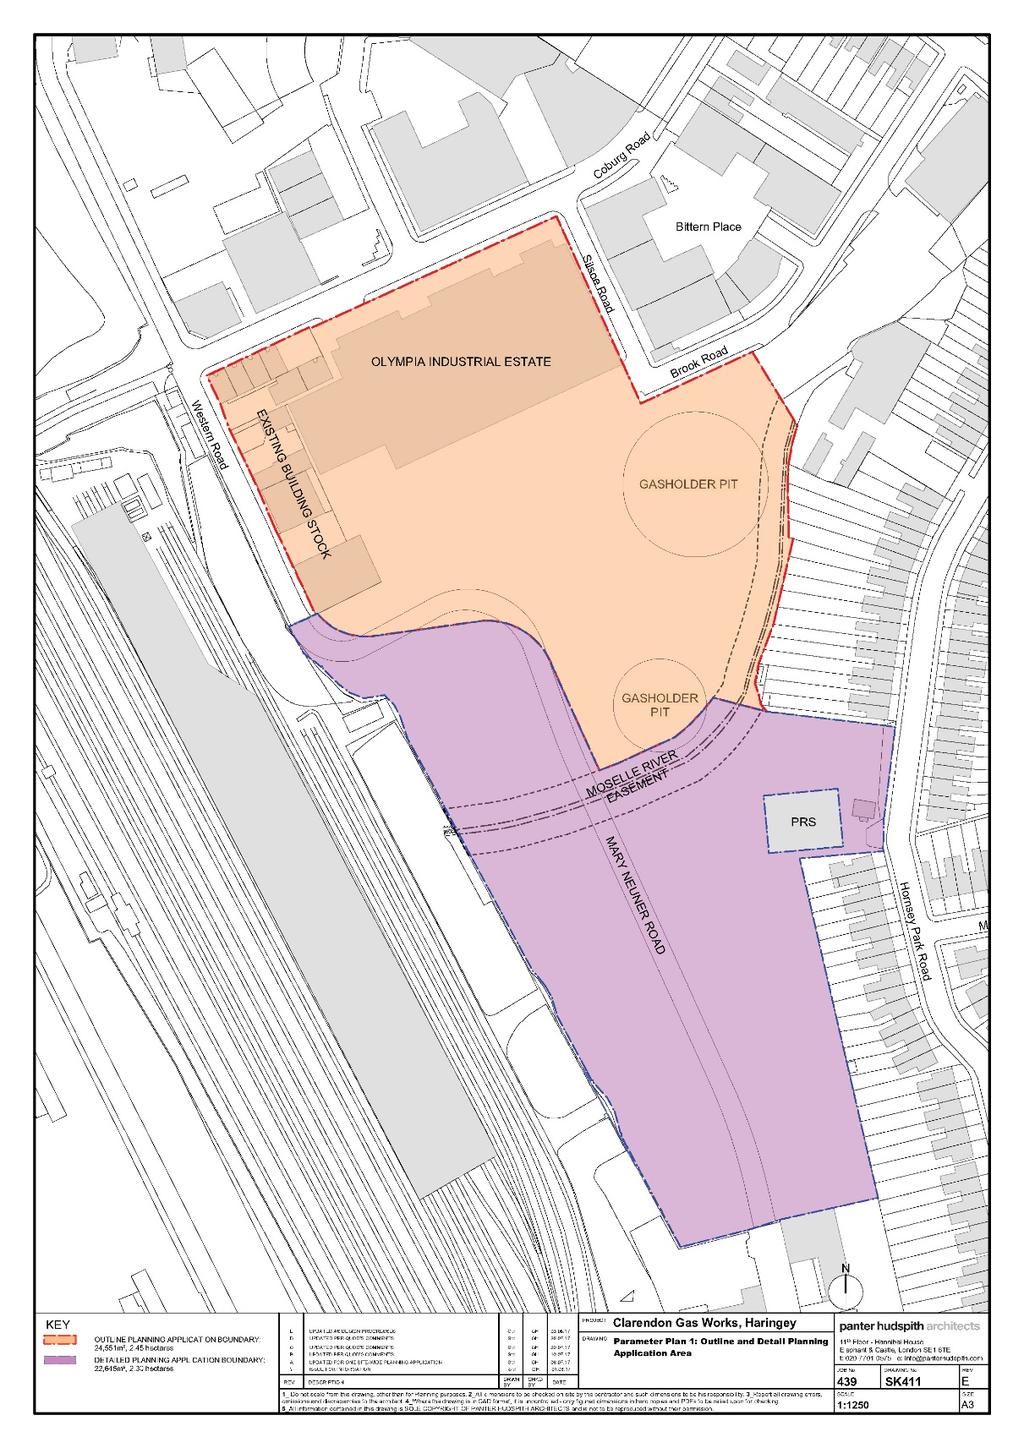 The submitted planning application is a hybrid application (the Application ) and comprises an Outline Component for the northern part of the Site (approx. 2.